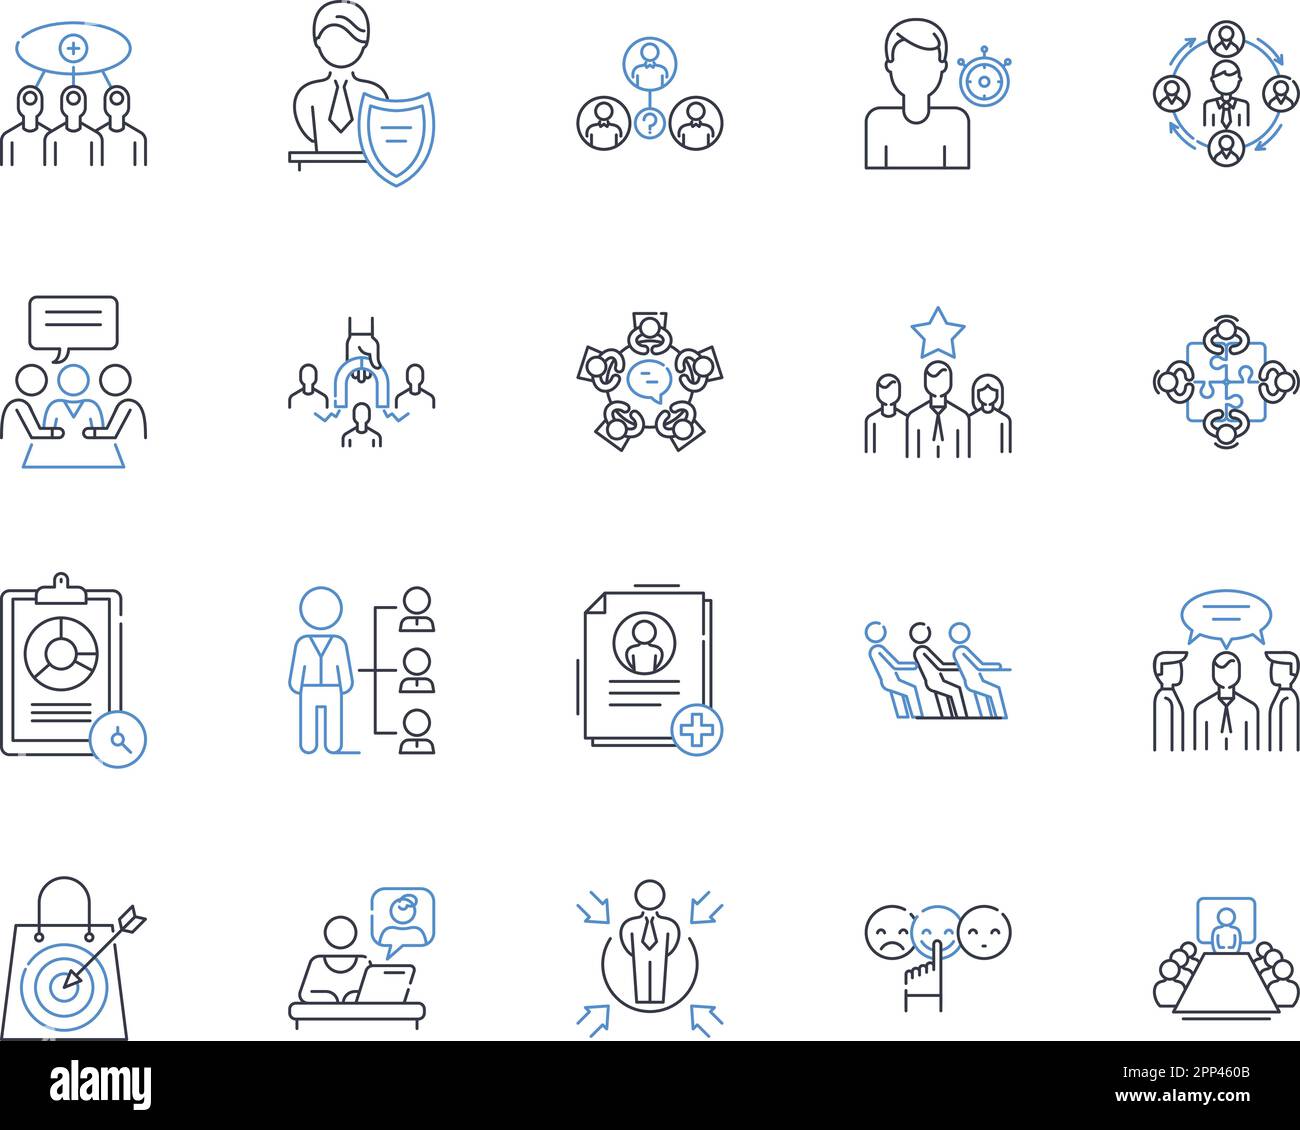 Command center line icons collection. Control, Hub, Command, Central, Operations, Monitor, Management vector and linear illustration. Oversight Stock Vector